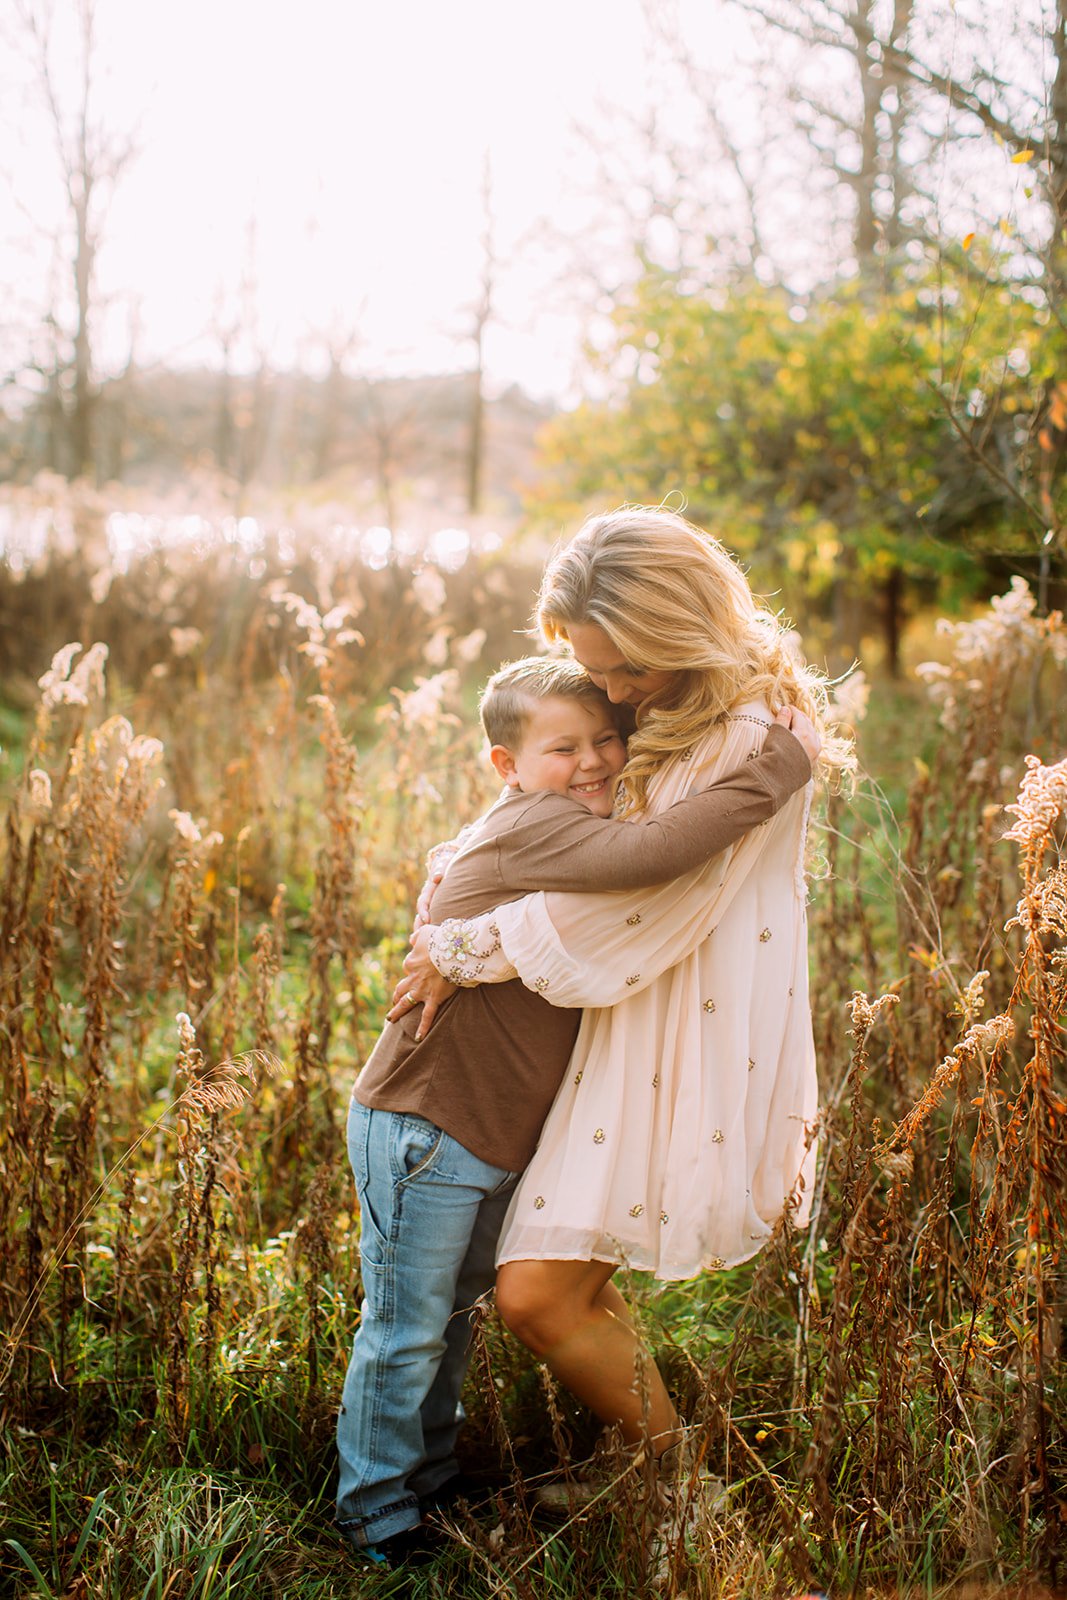  A mother hugs her blonde elementary-age son at dusk in Illinois by Teala Ward Photography. midwest family photography #TealaWardPhotography #TealaWardFamilies #holidayfamilypics #photography #Illinoisfamilyphotography #familysession 